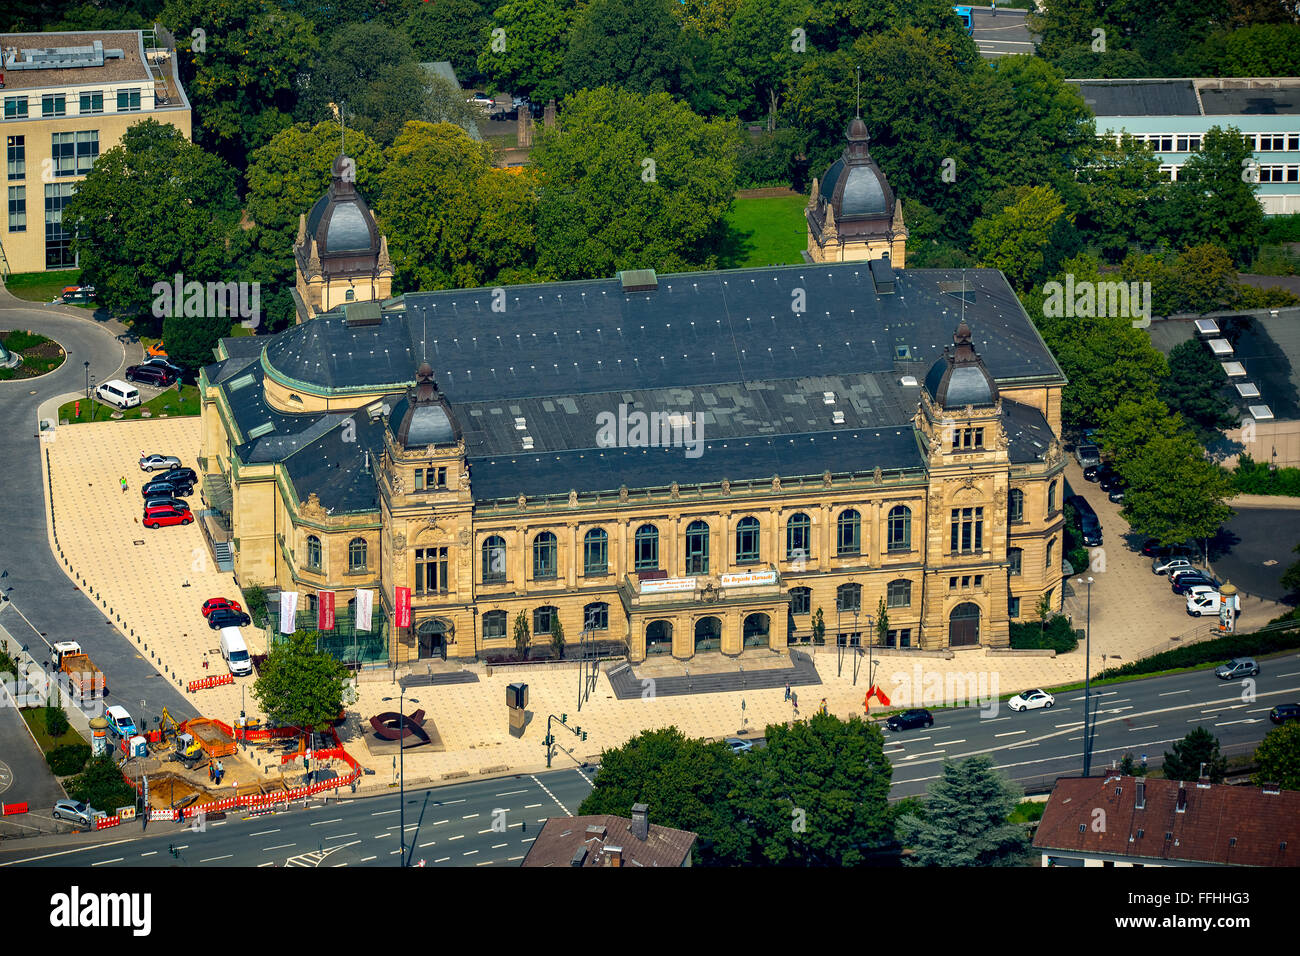 Aerial view, the Stadthalle Wuppertal, Historic the Stadthalle on Johannisberg, Town Hall, Concert Hall symphony orchestra Stock Photo